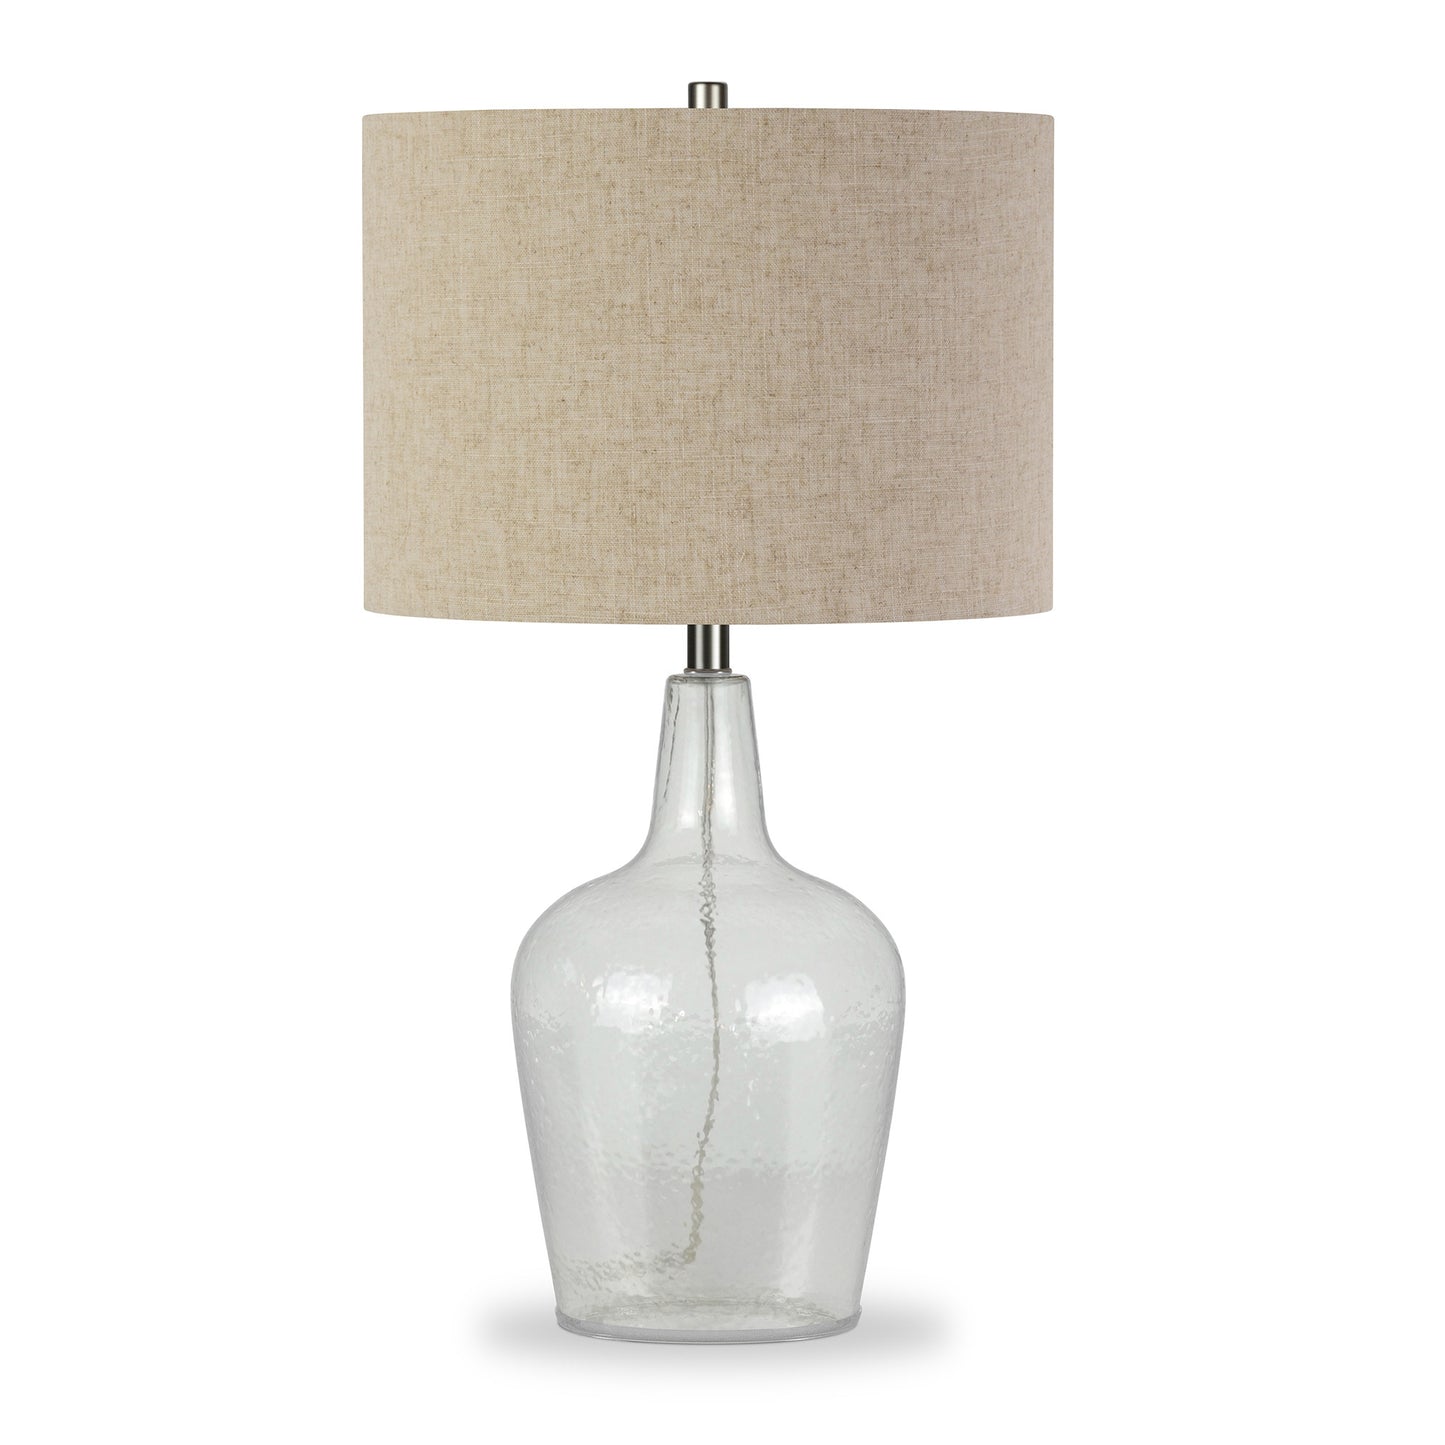 26" Clear Glass Table Lamp With Flax Drum Shade